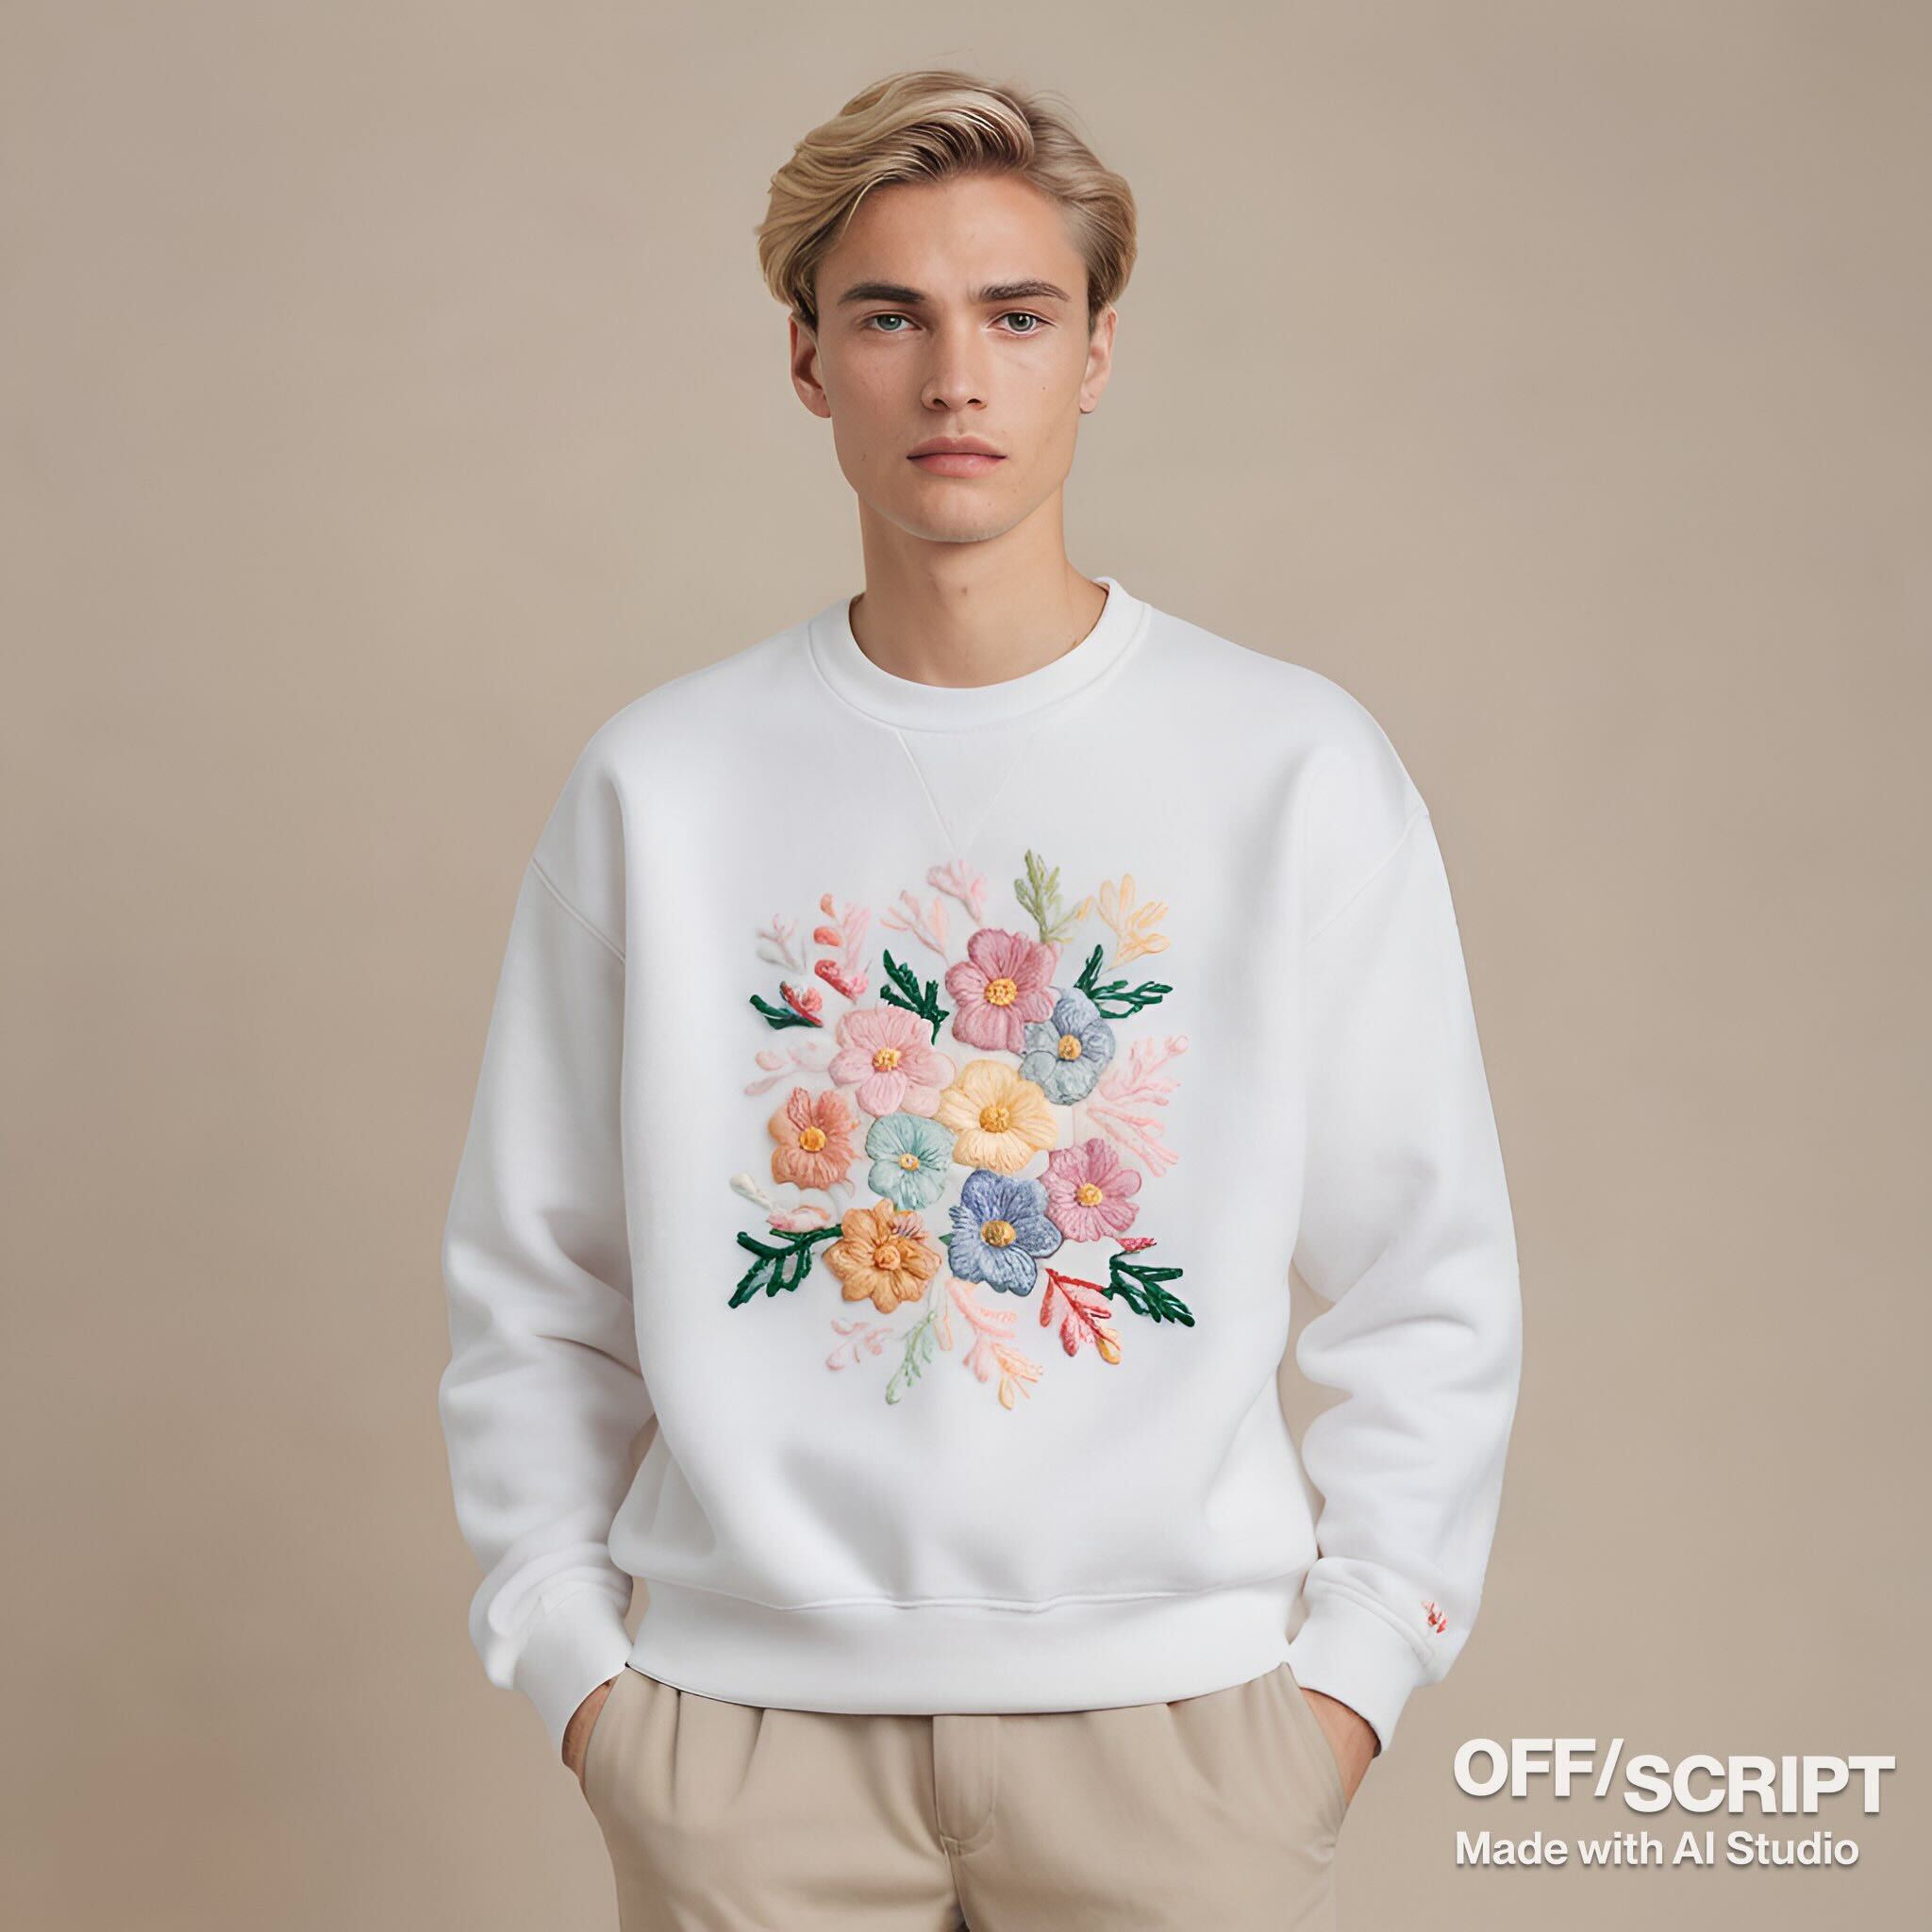 product shot of a white crewneck, with pastel color embroidered flowers in the garment, high-quality texture, premium crewneck, studio photography, plain background